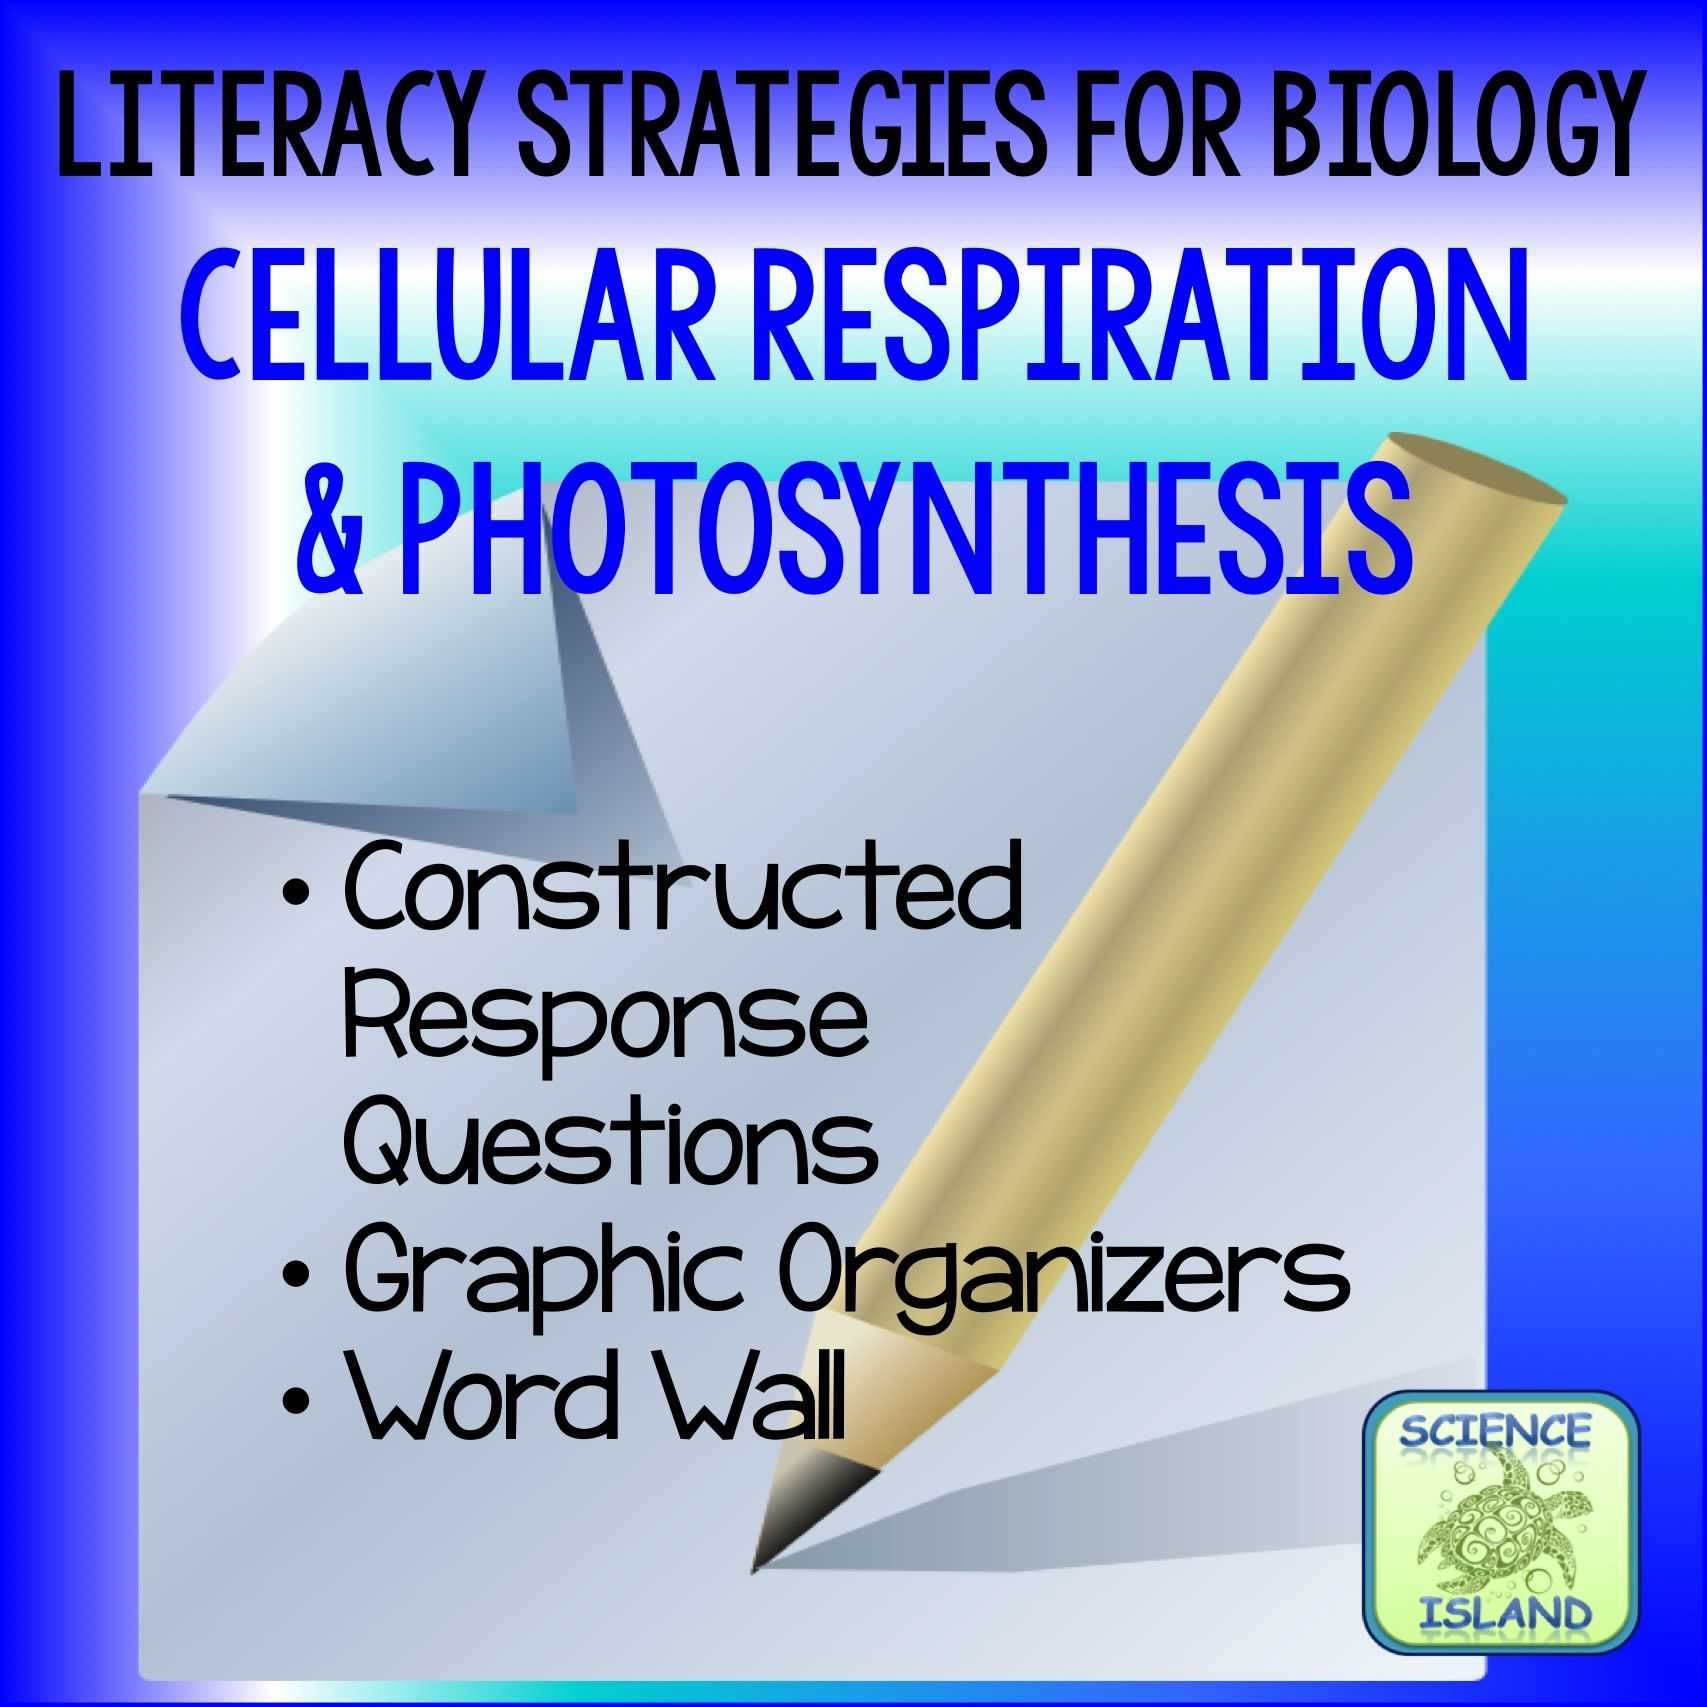 Photosynthesis and Cellular Respiration Review Worksheet Answer Key as Well as Literacy Strategies for Biology Cellular Respiration and